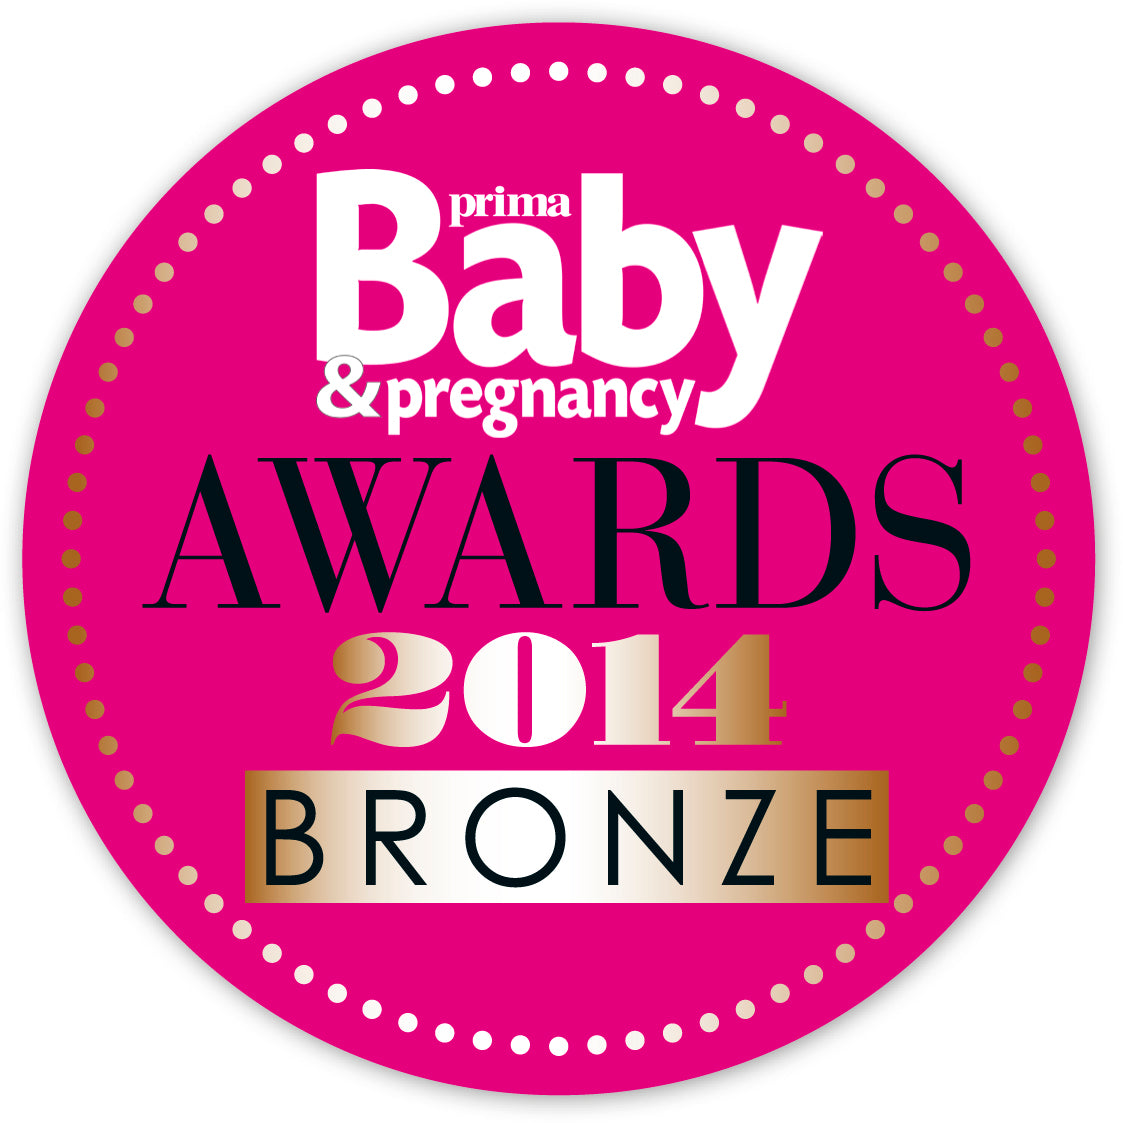 Prime baby & pregnancy awards 2014 bronze badge featuring Alteya's Rose Fields and Rosa Damascena.